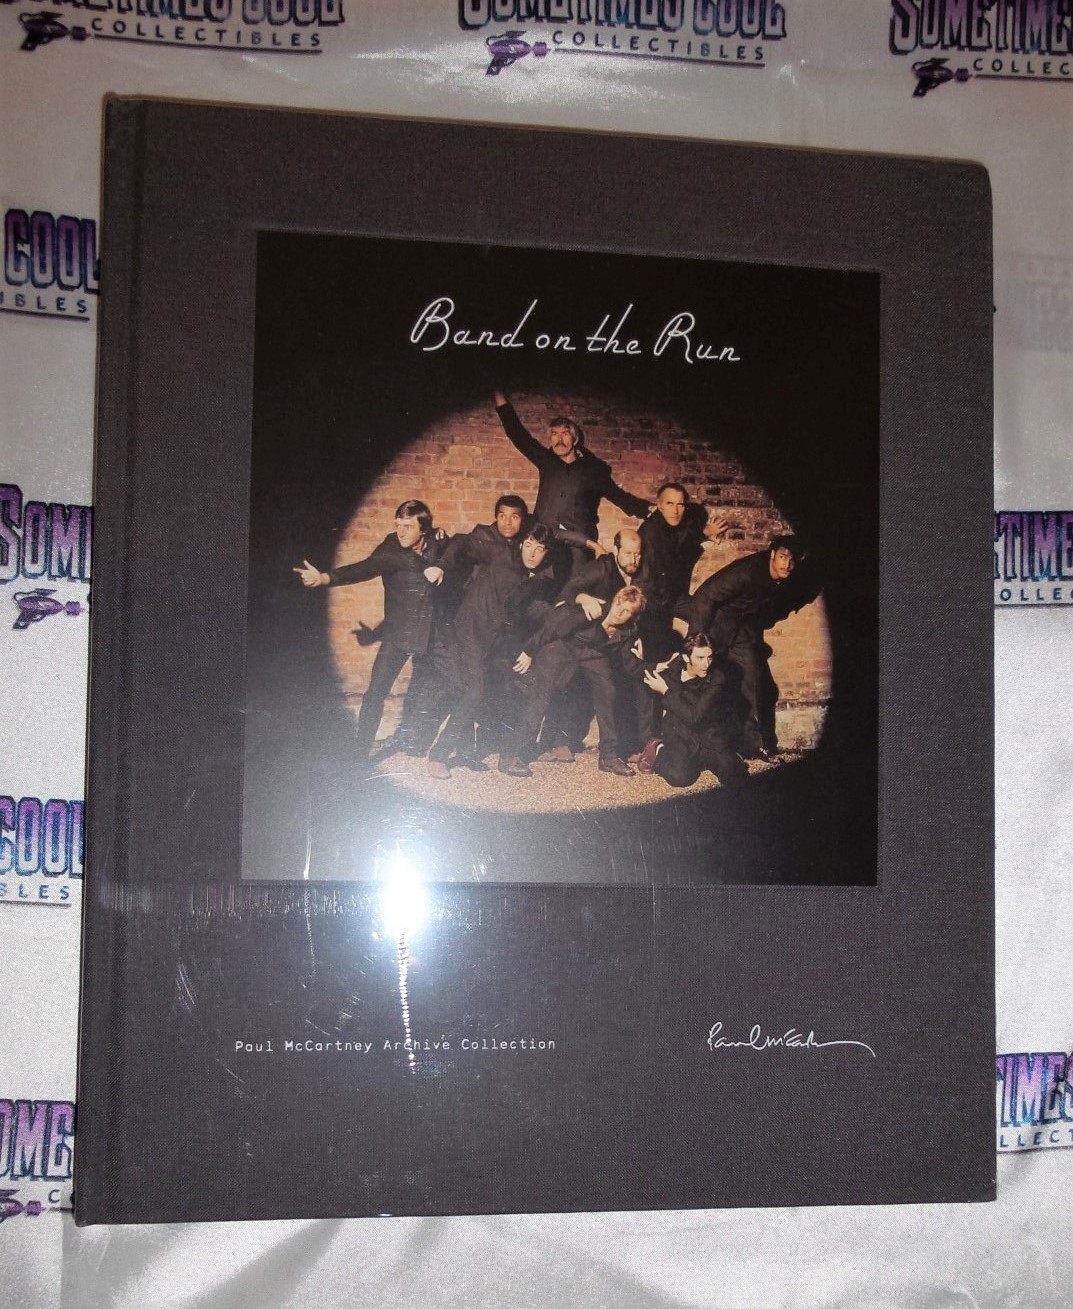 Paul McCartney Archive Collection : Band on the Run